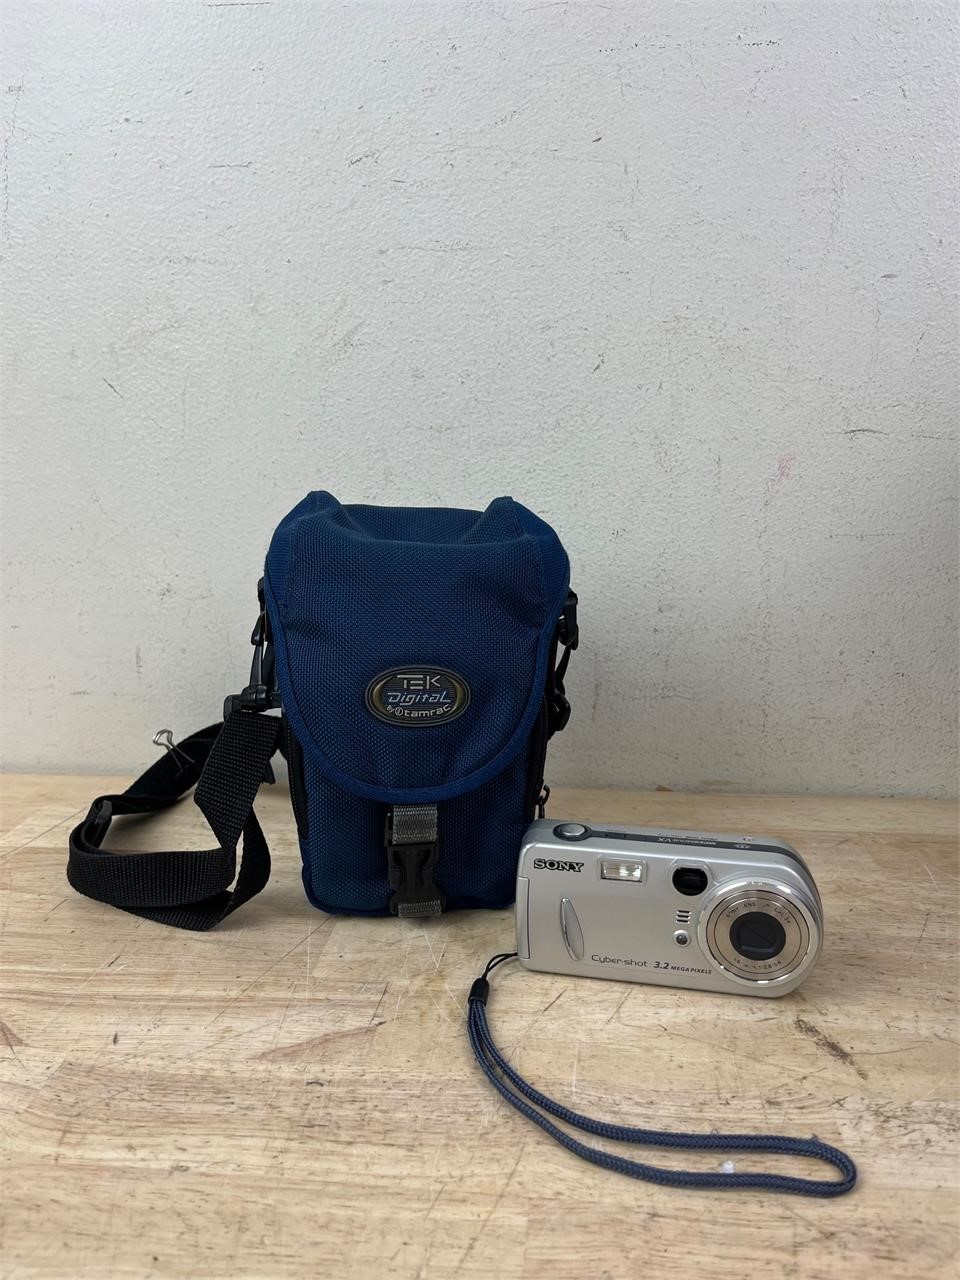 Sony Cybershot camera with case